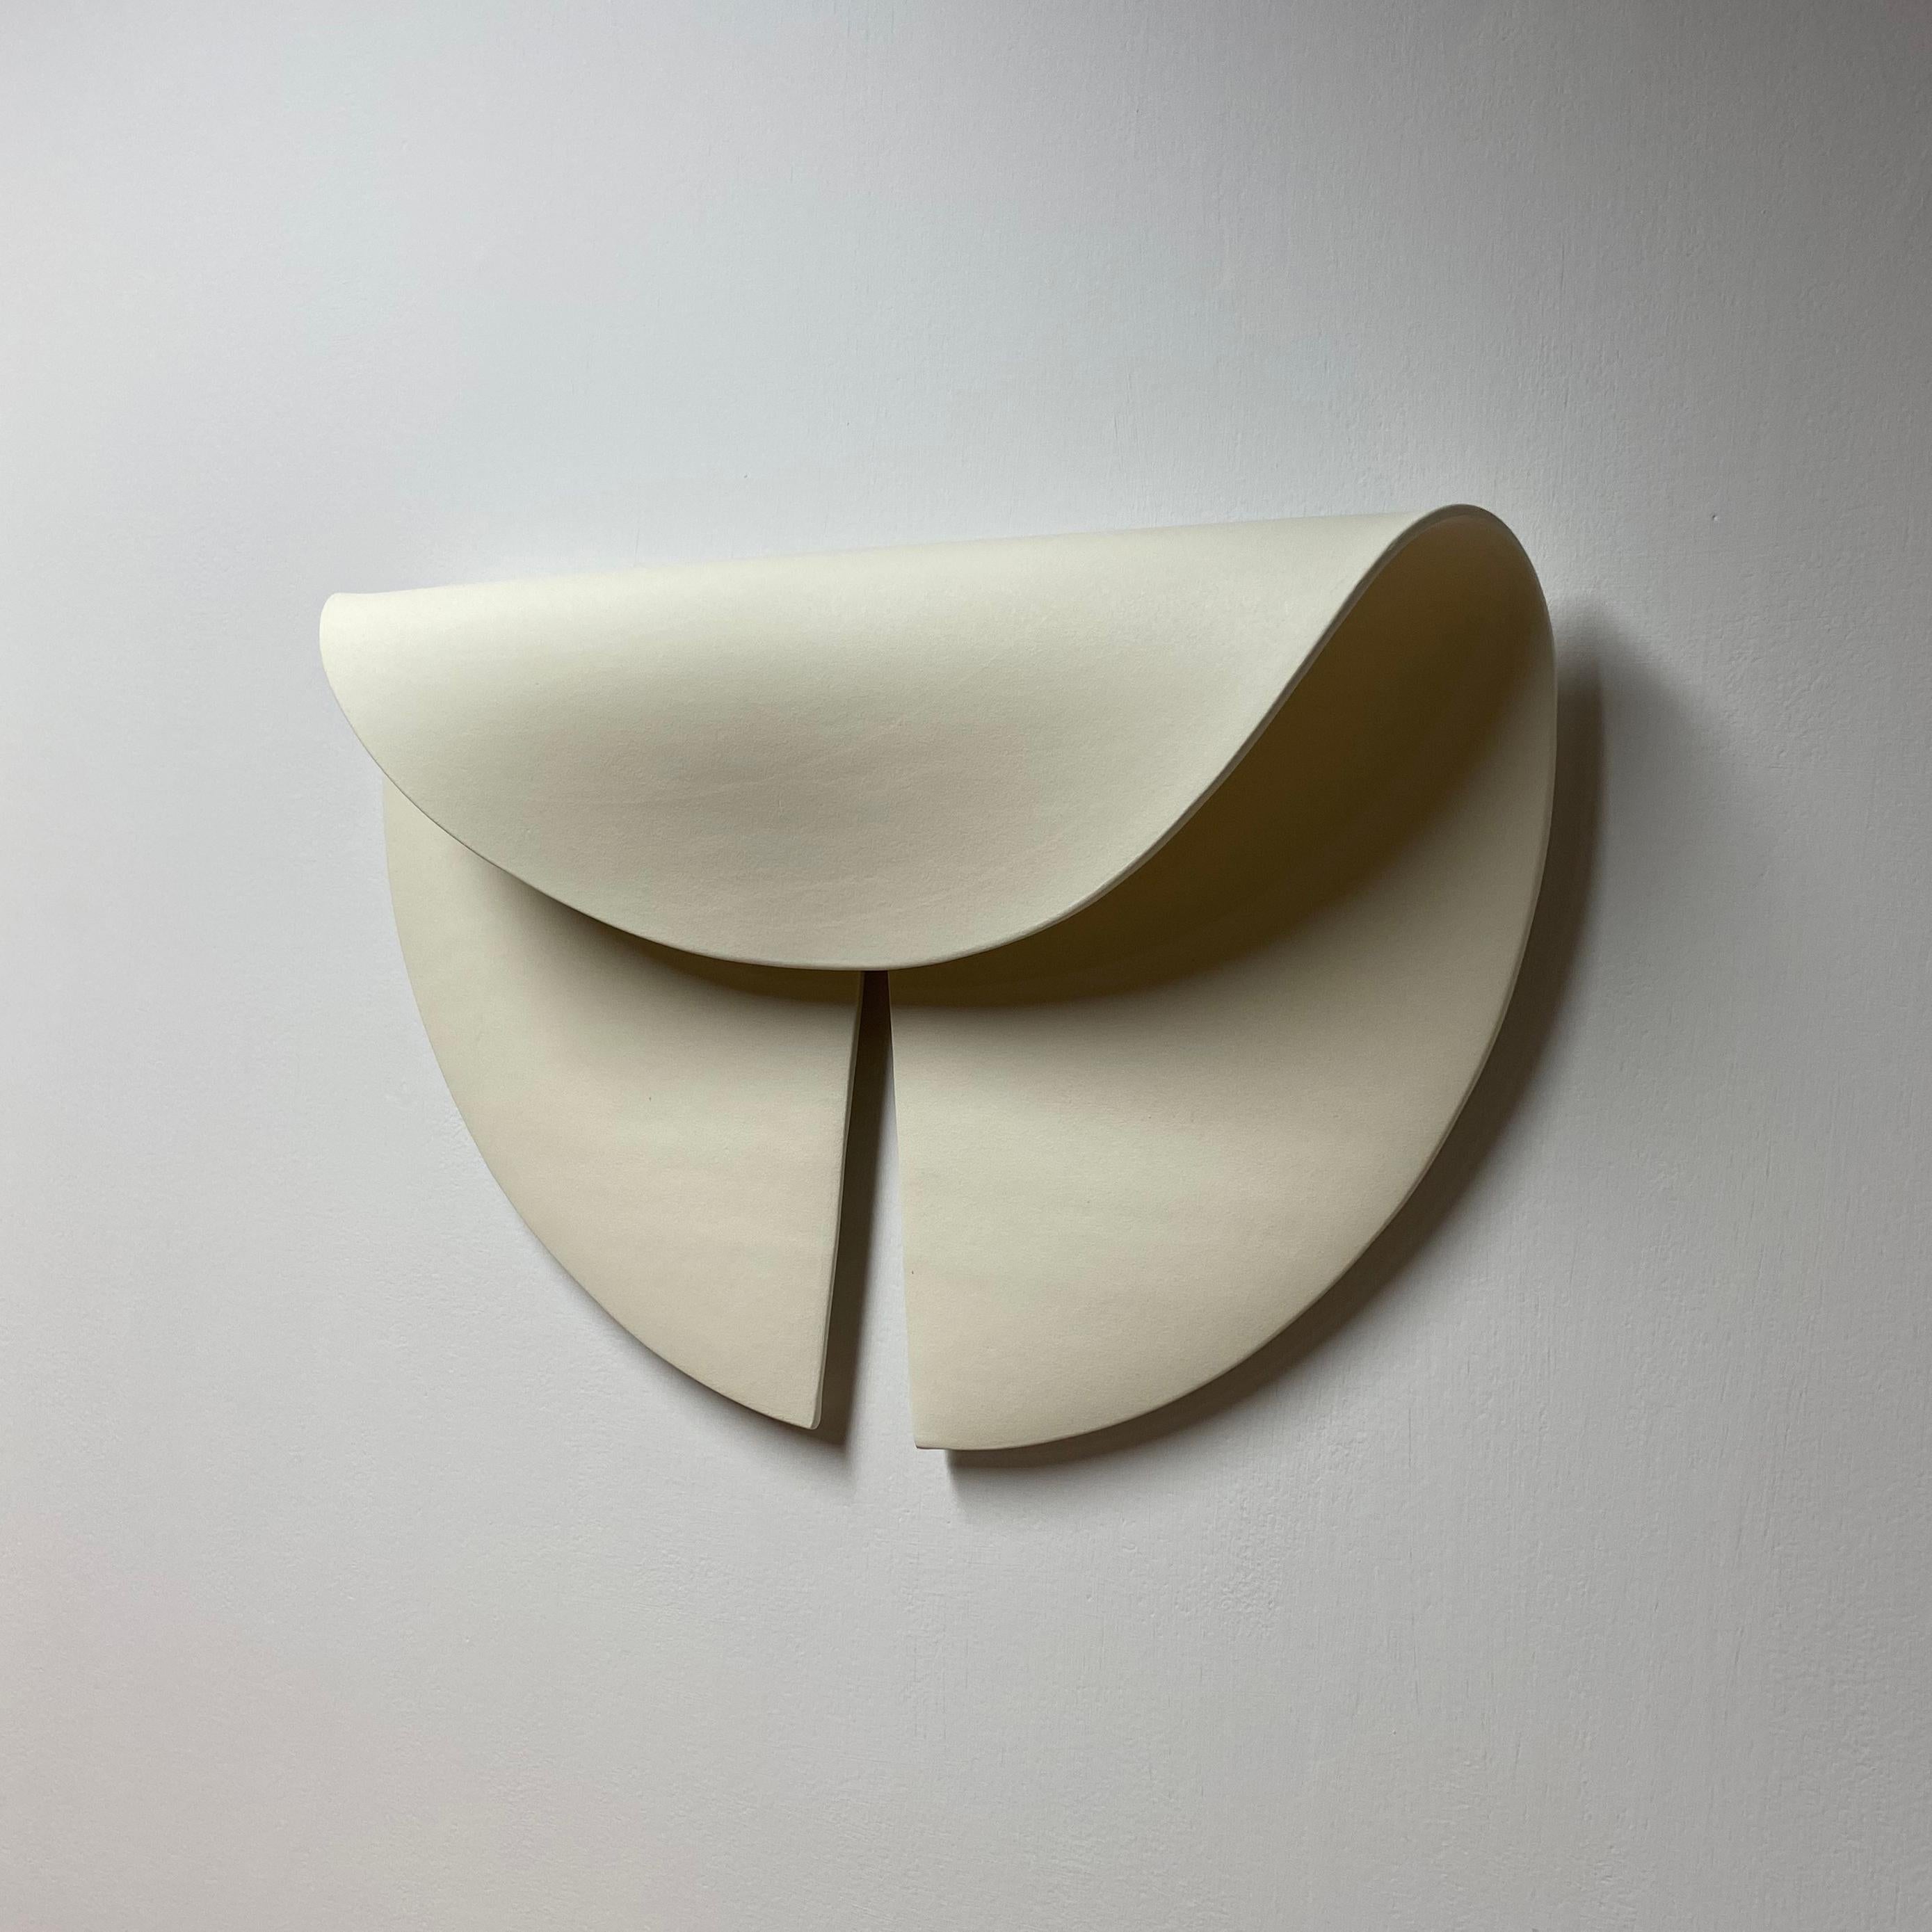 Fired Ceramic Wall Sculpture: 'Leaf' / By Olivia Barry For Sale